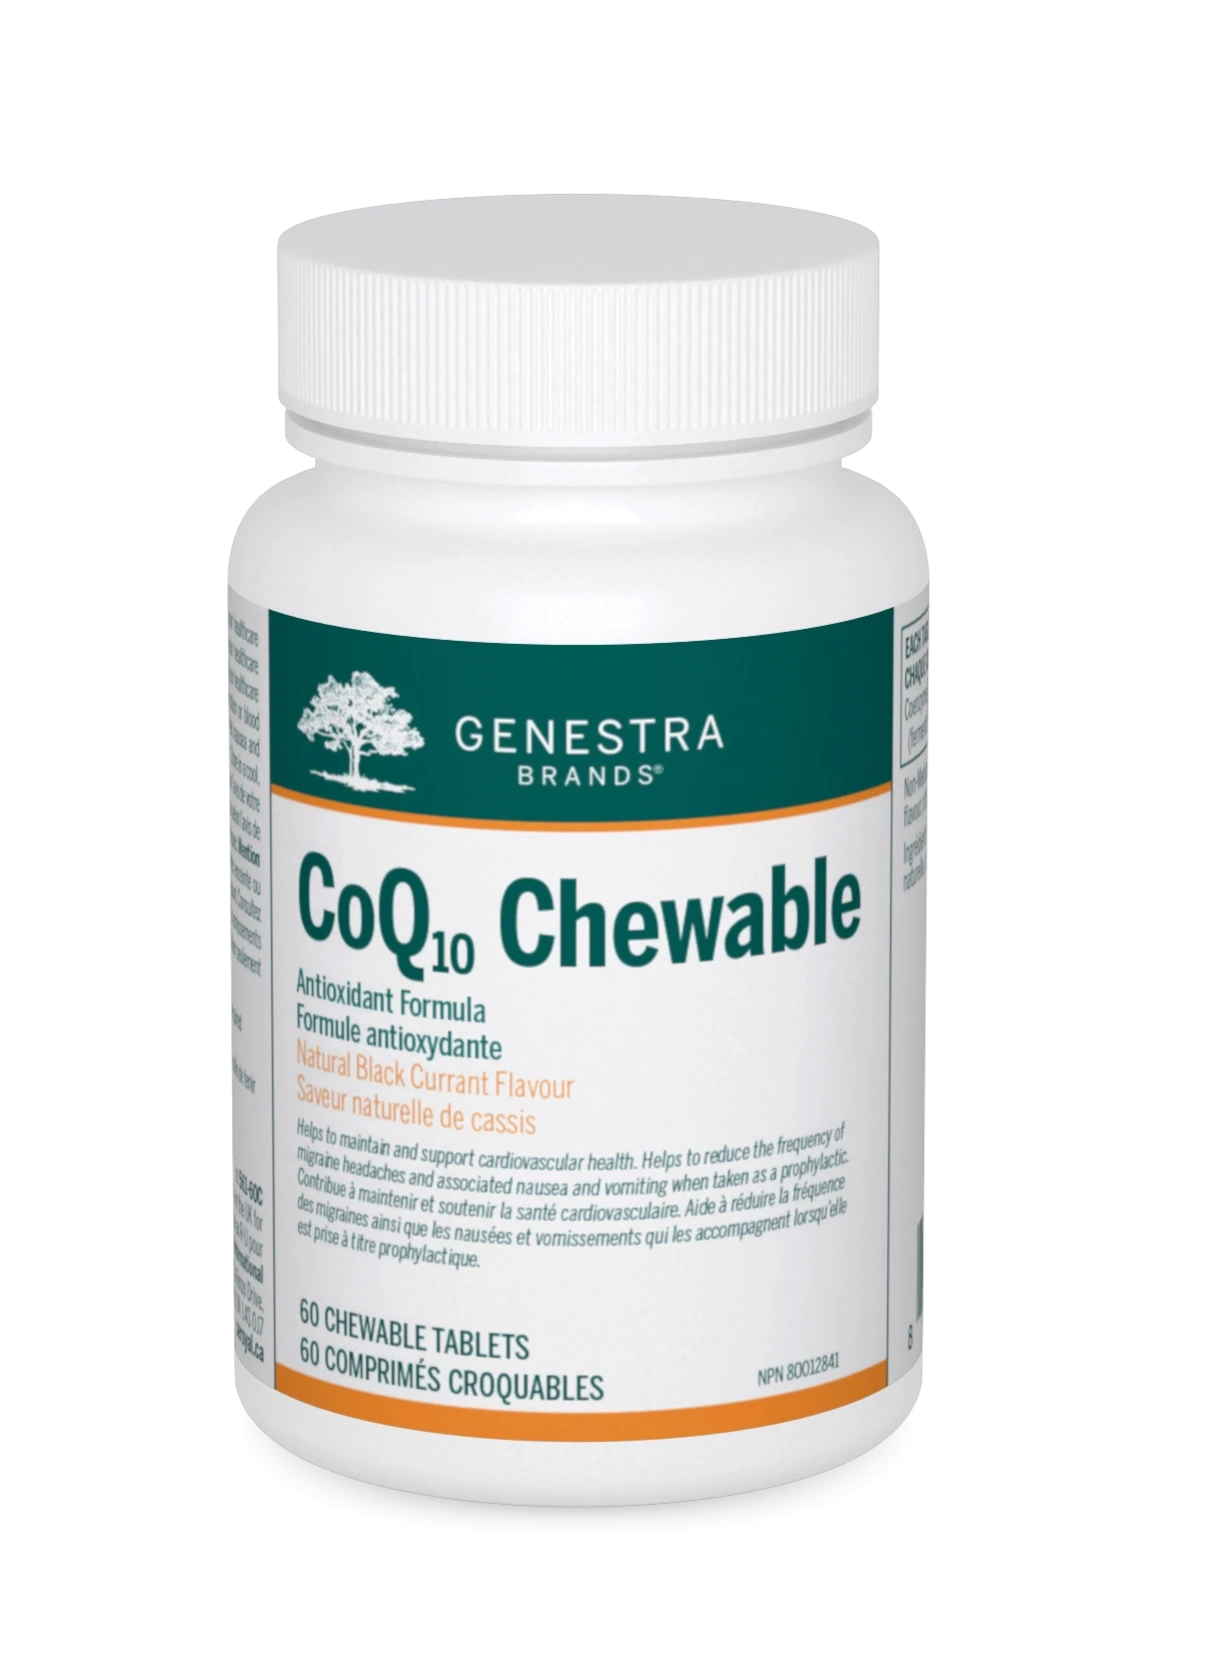 Genestra CoQ10 Chewable (60 Chewable Tablets)